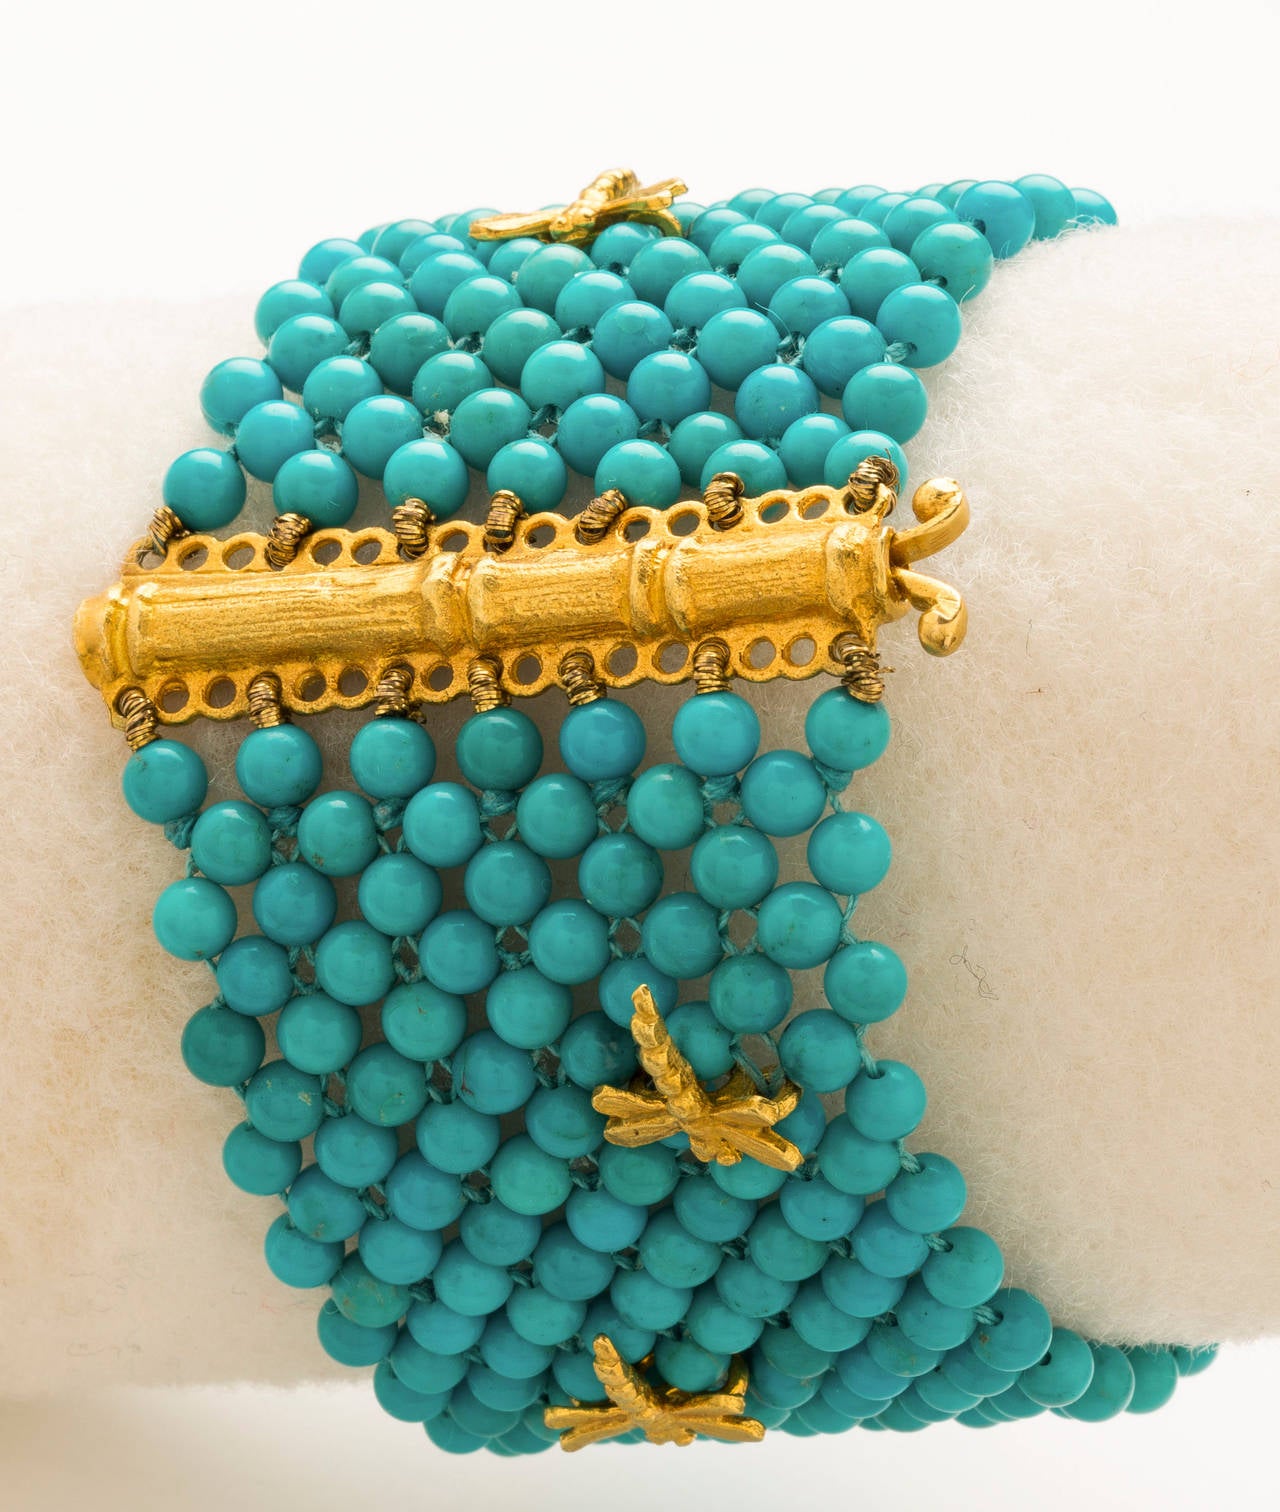 Beautifully & intricately hand woven turquoise beads in a multi-strand bracelet set with six 18 karat brushed yellow gold dragonflies and brushed gold bamboo style closure.Turquoise beads- 3mm. Length 7 inches & width 1 1/2 inches.